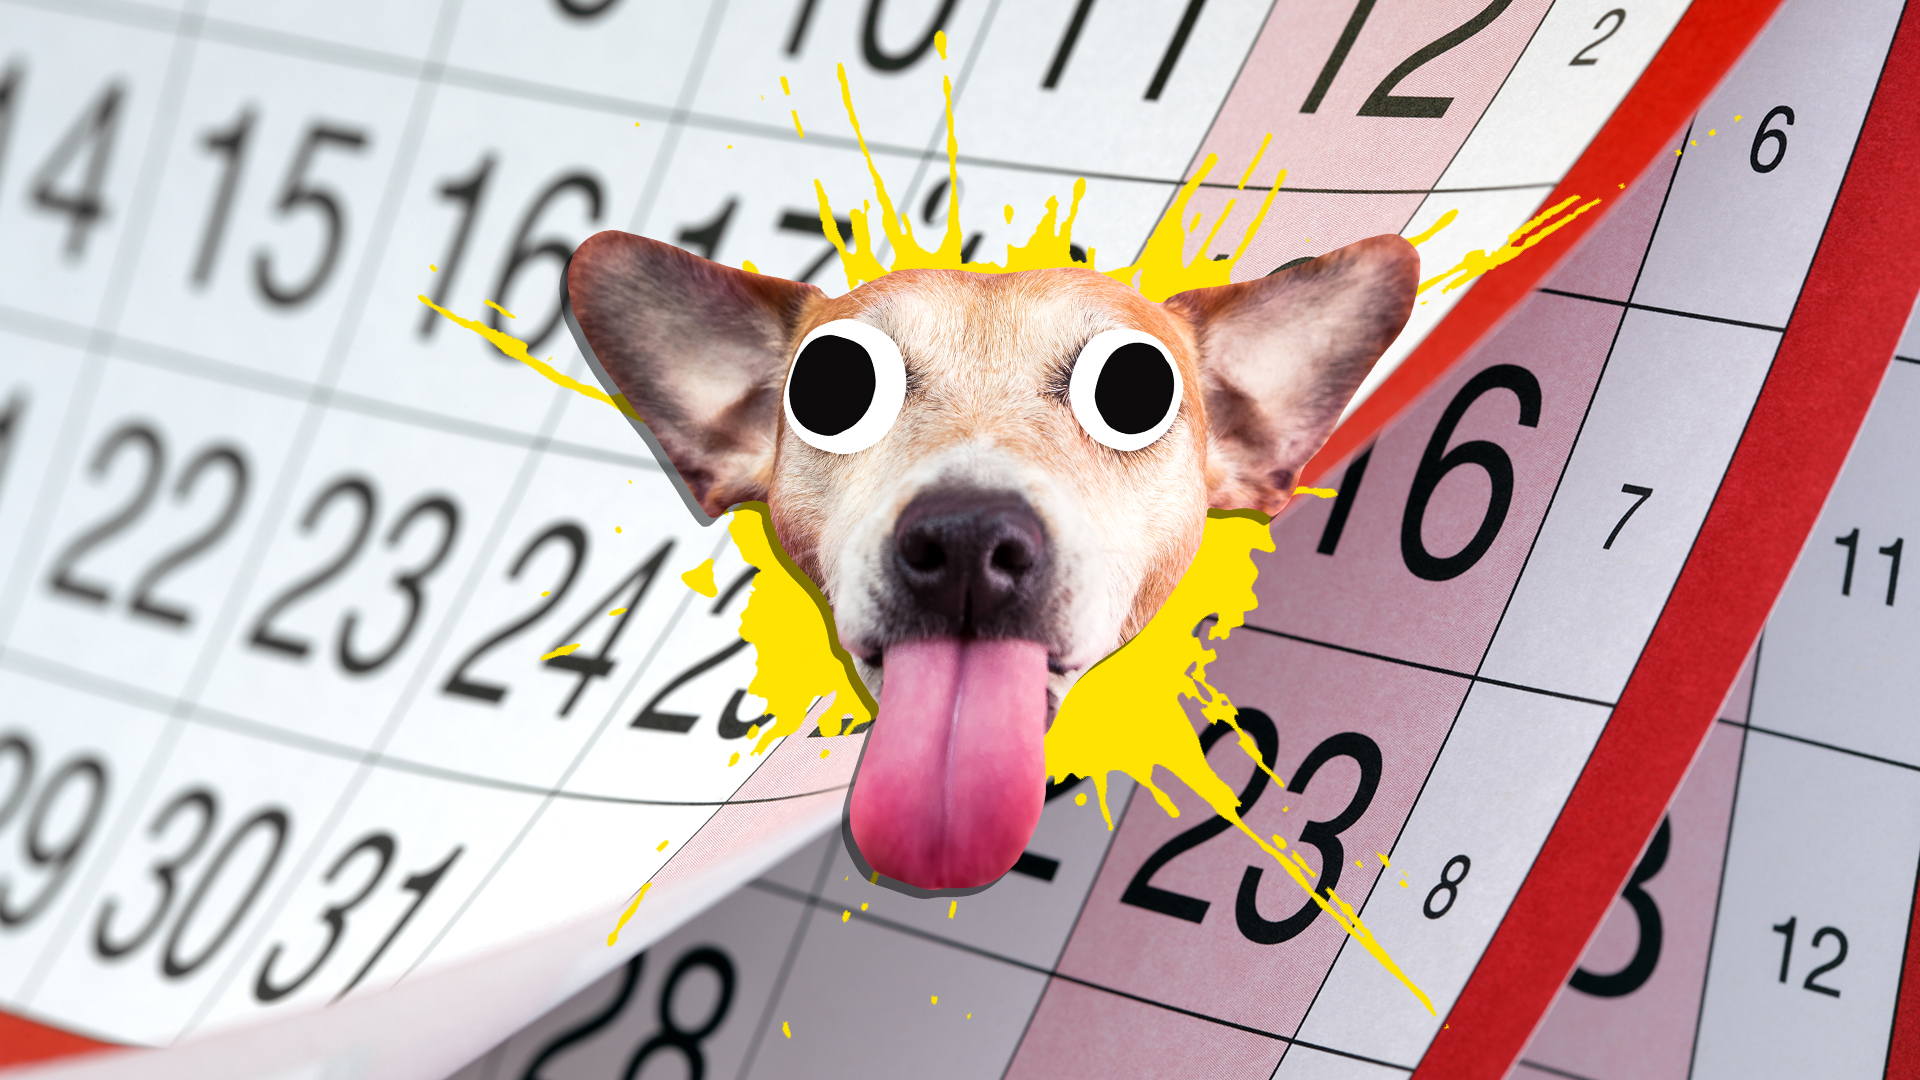 A dog sticking its tongue out and a calendar in the background